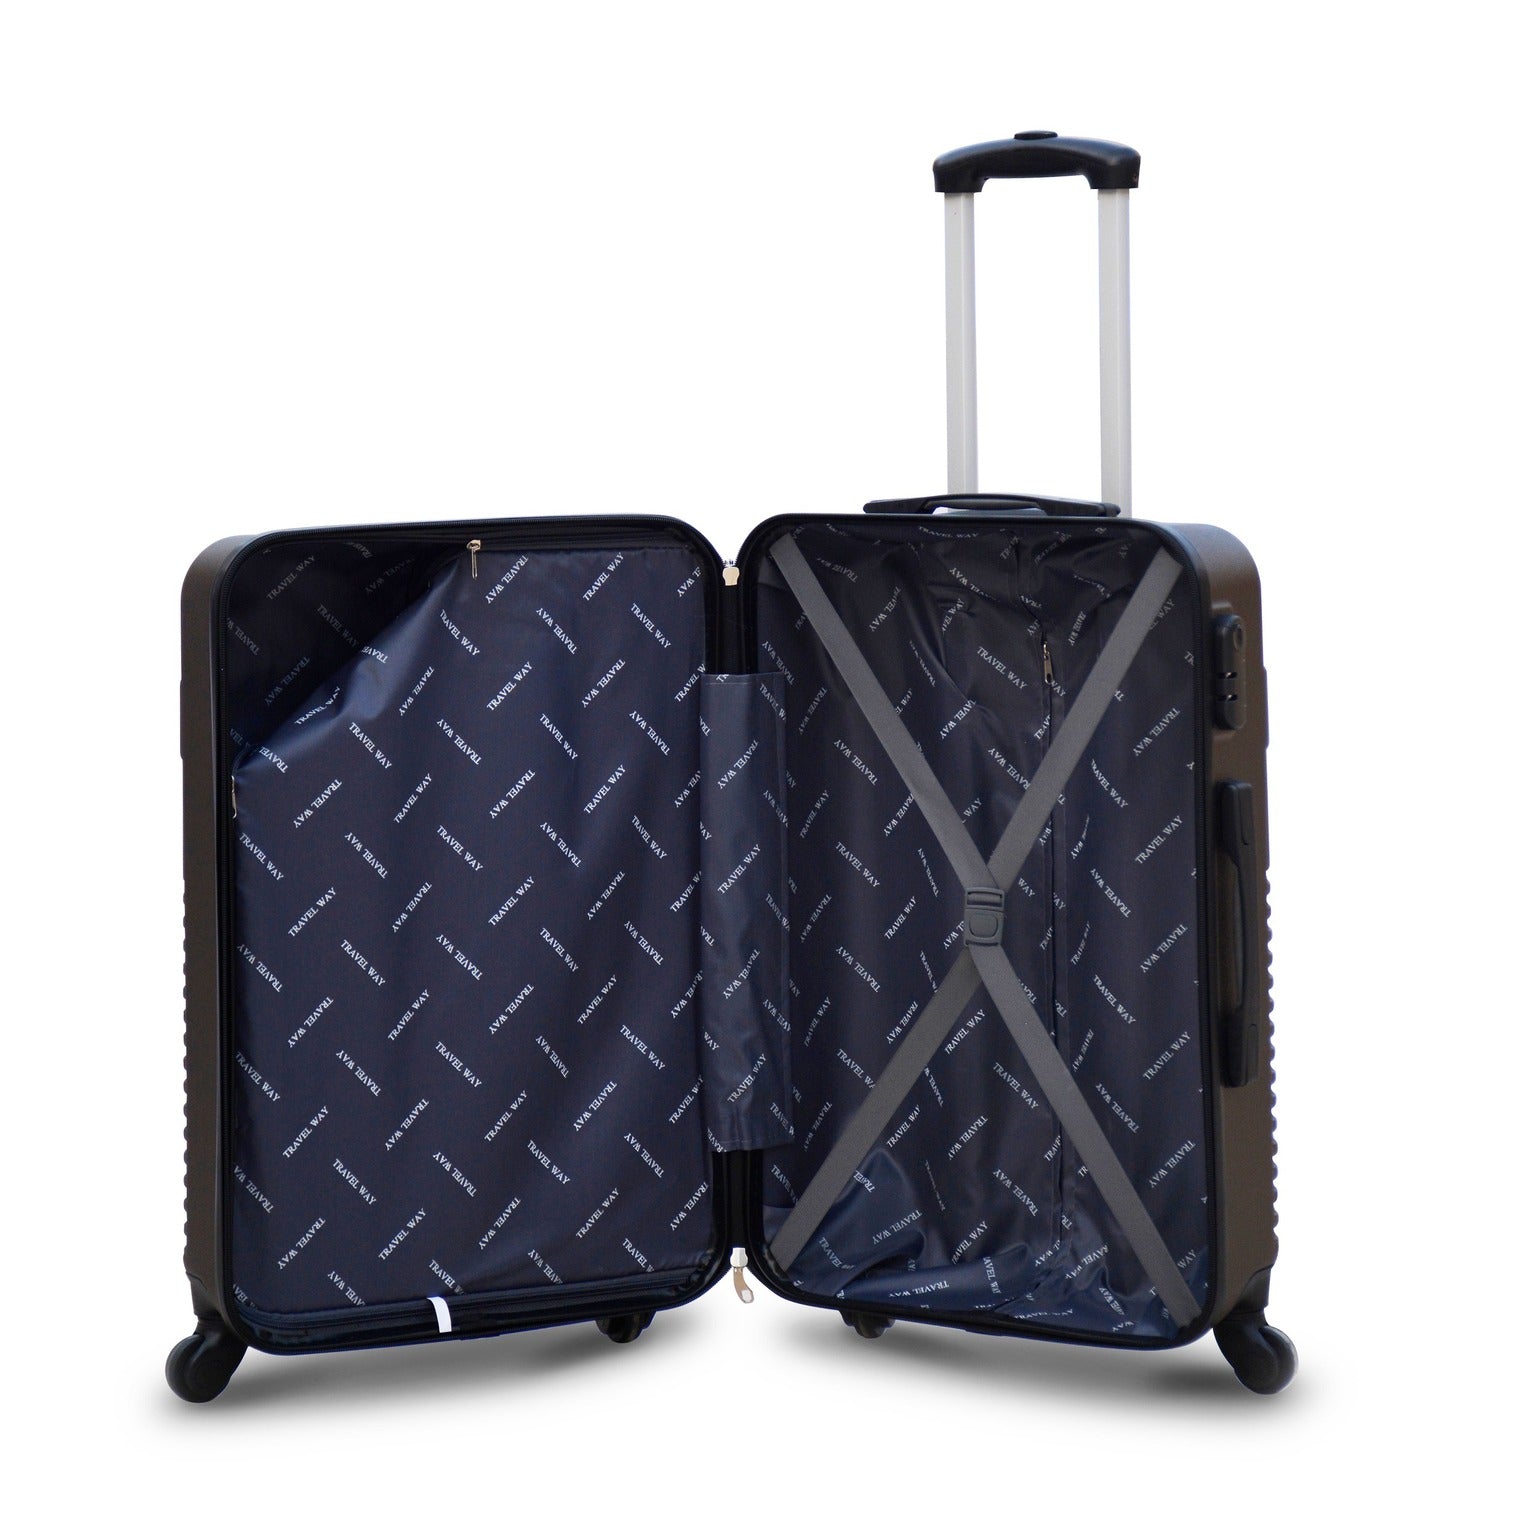 3 Piece Set  20" 24" 28 Inches Dark Grey Zig Zag ABS Lightweight Luggage Bag With Double Spinner Wheel